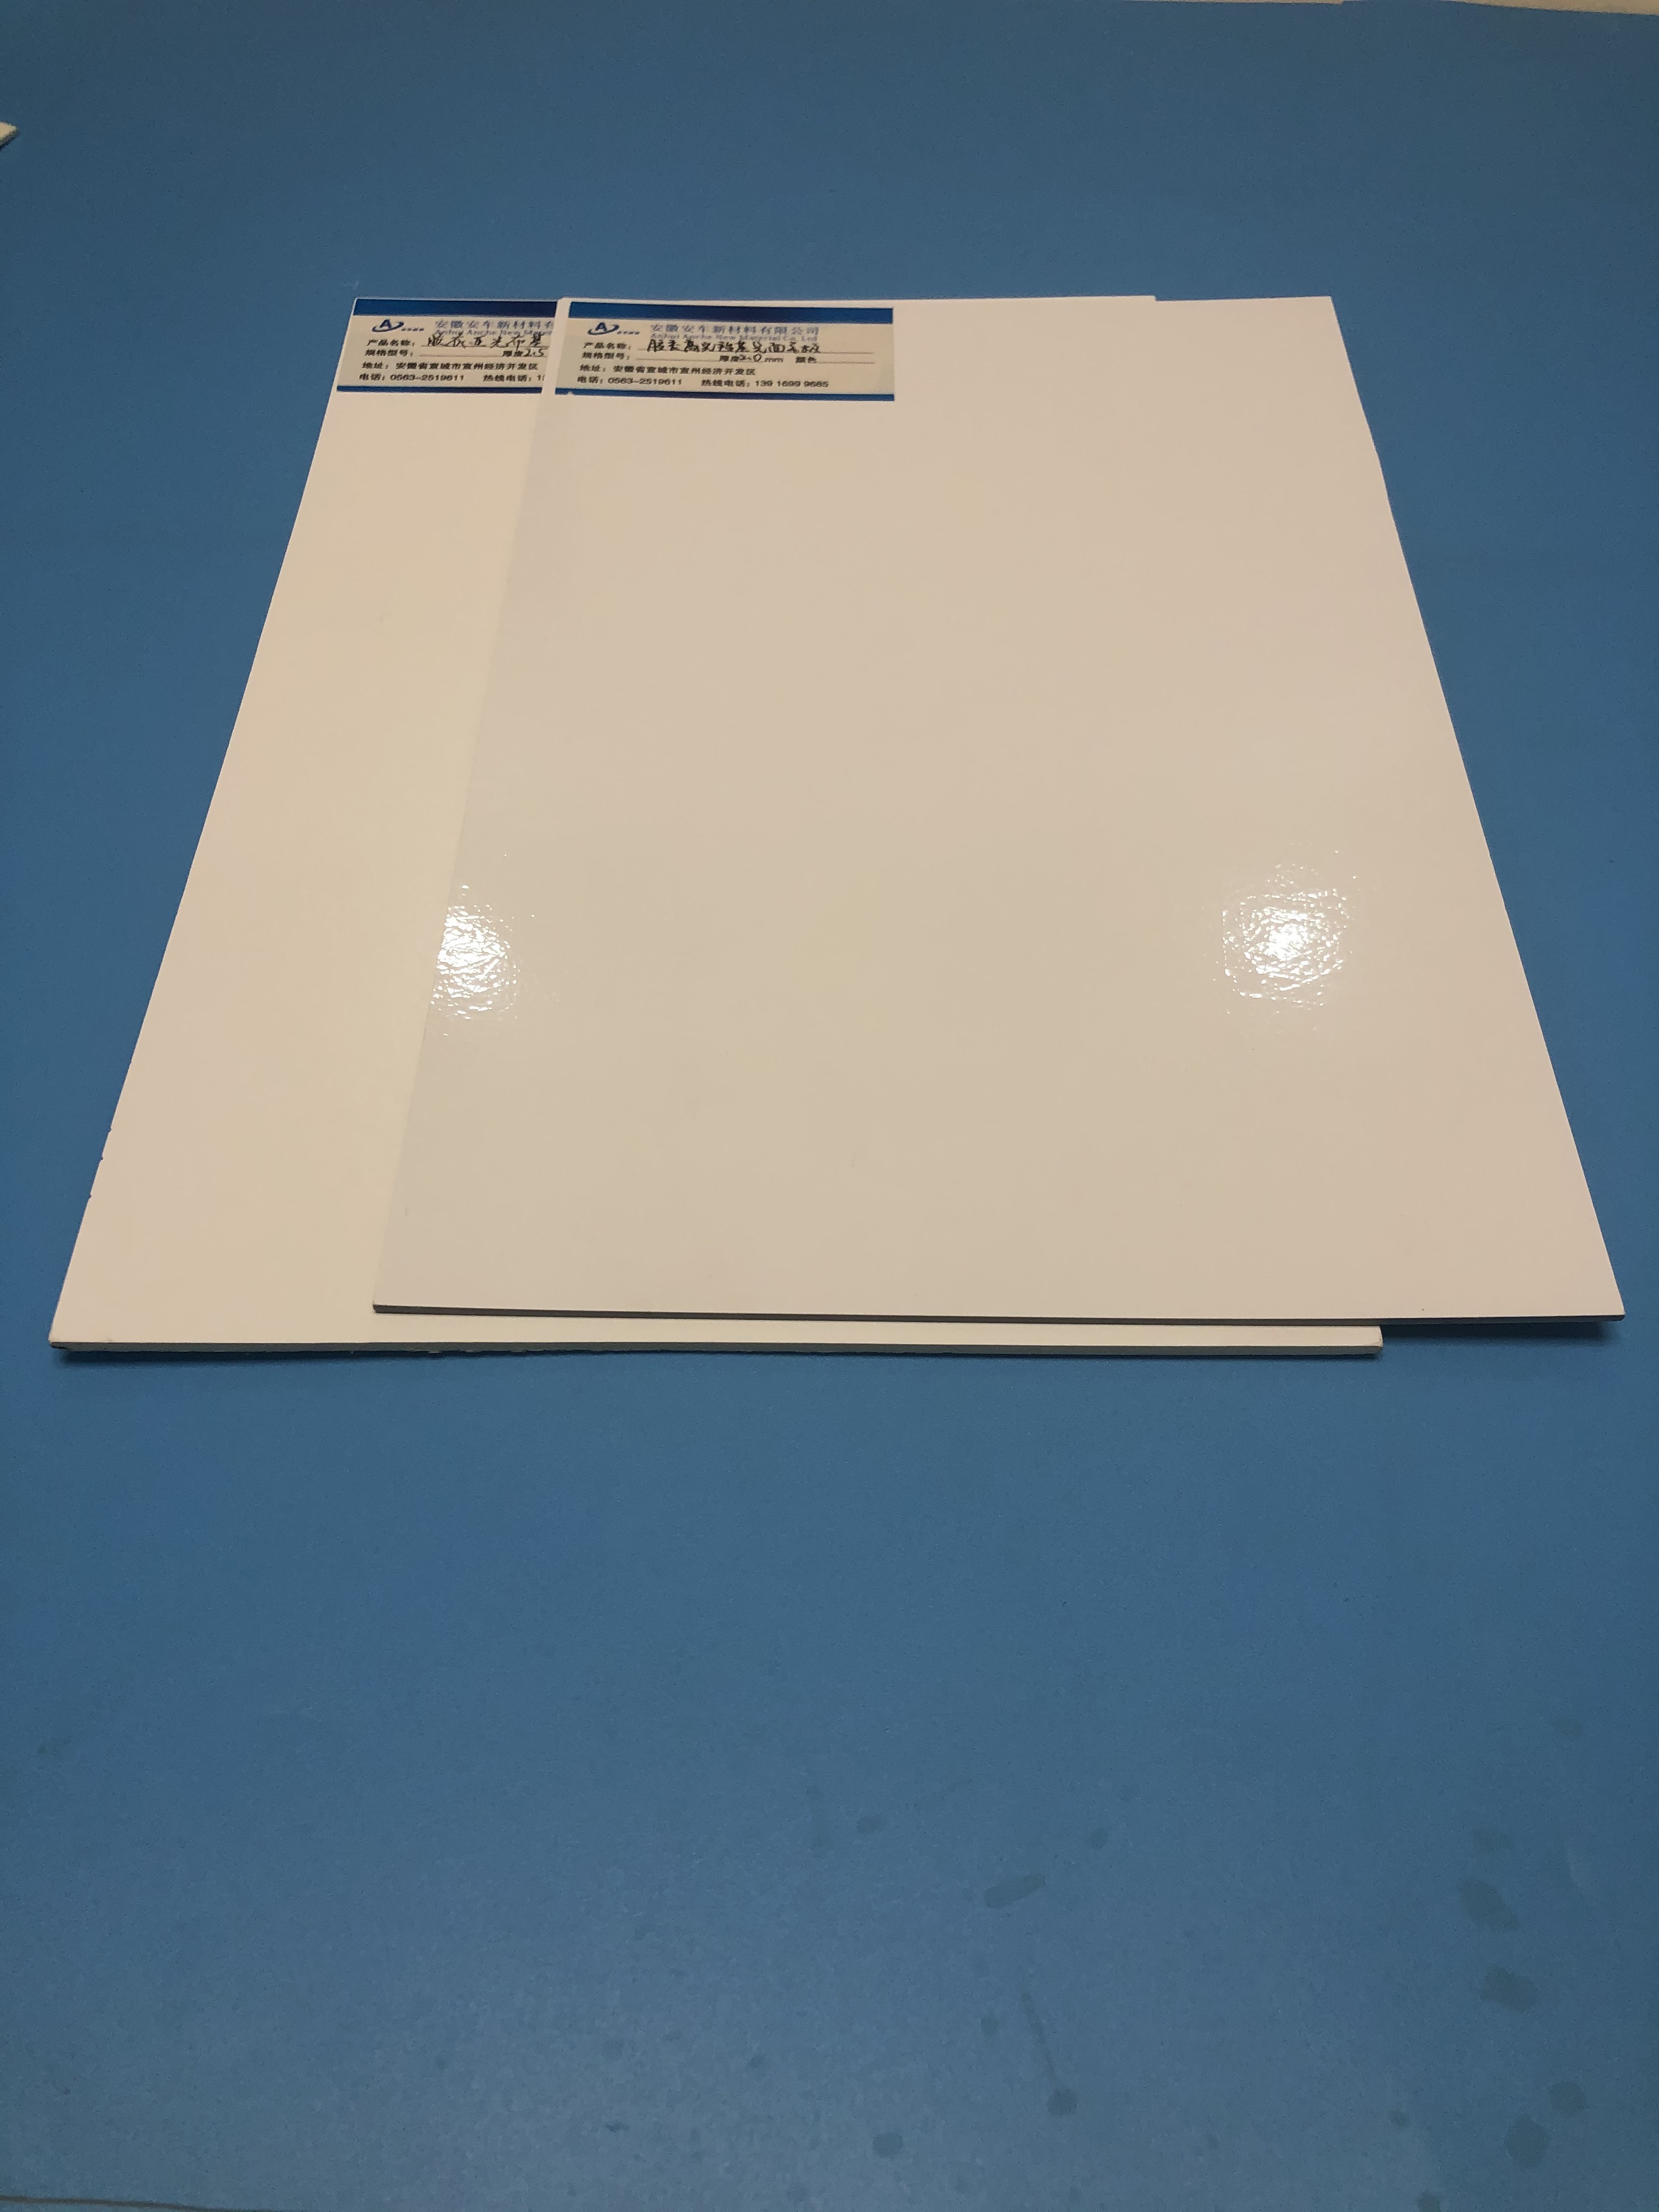 Wholesale Price Insulation Material Home Use Smooth Fiberglass Liner Panel 